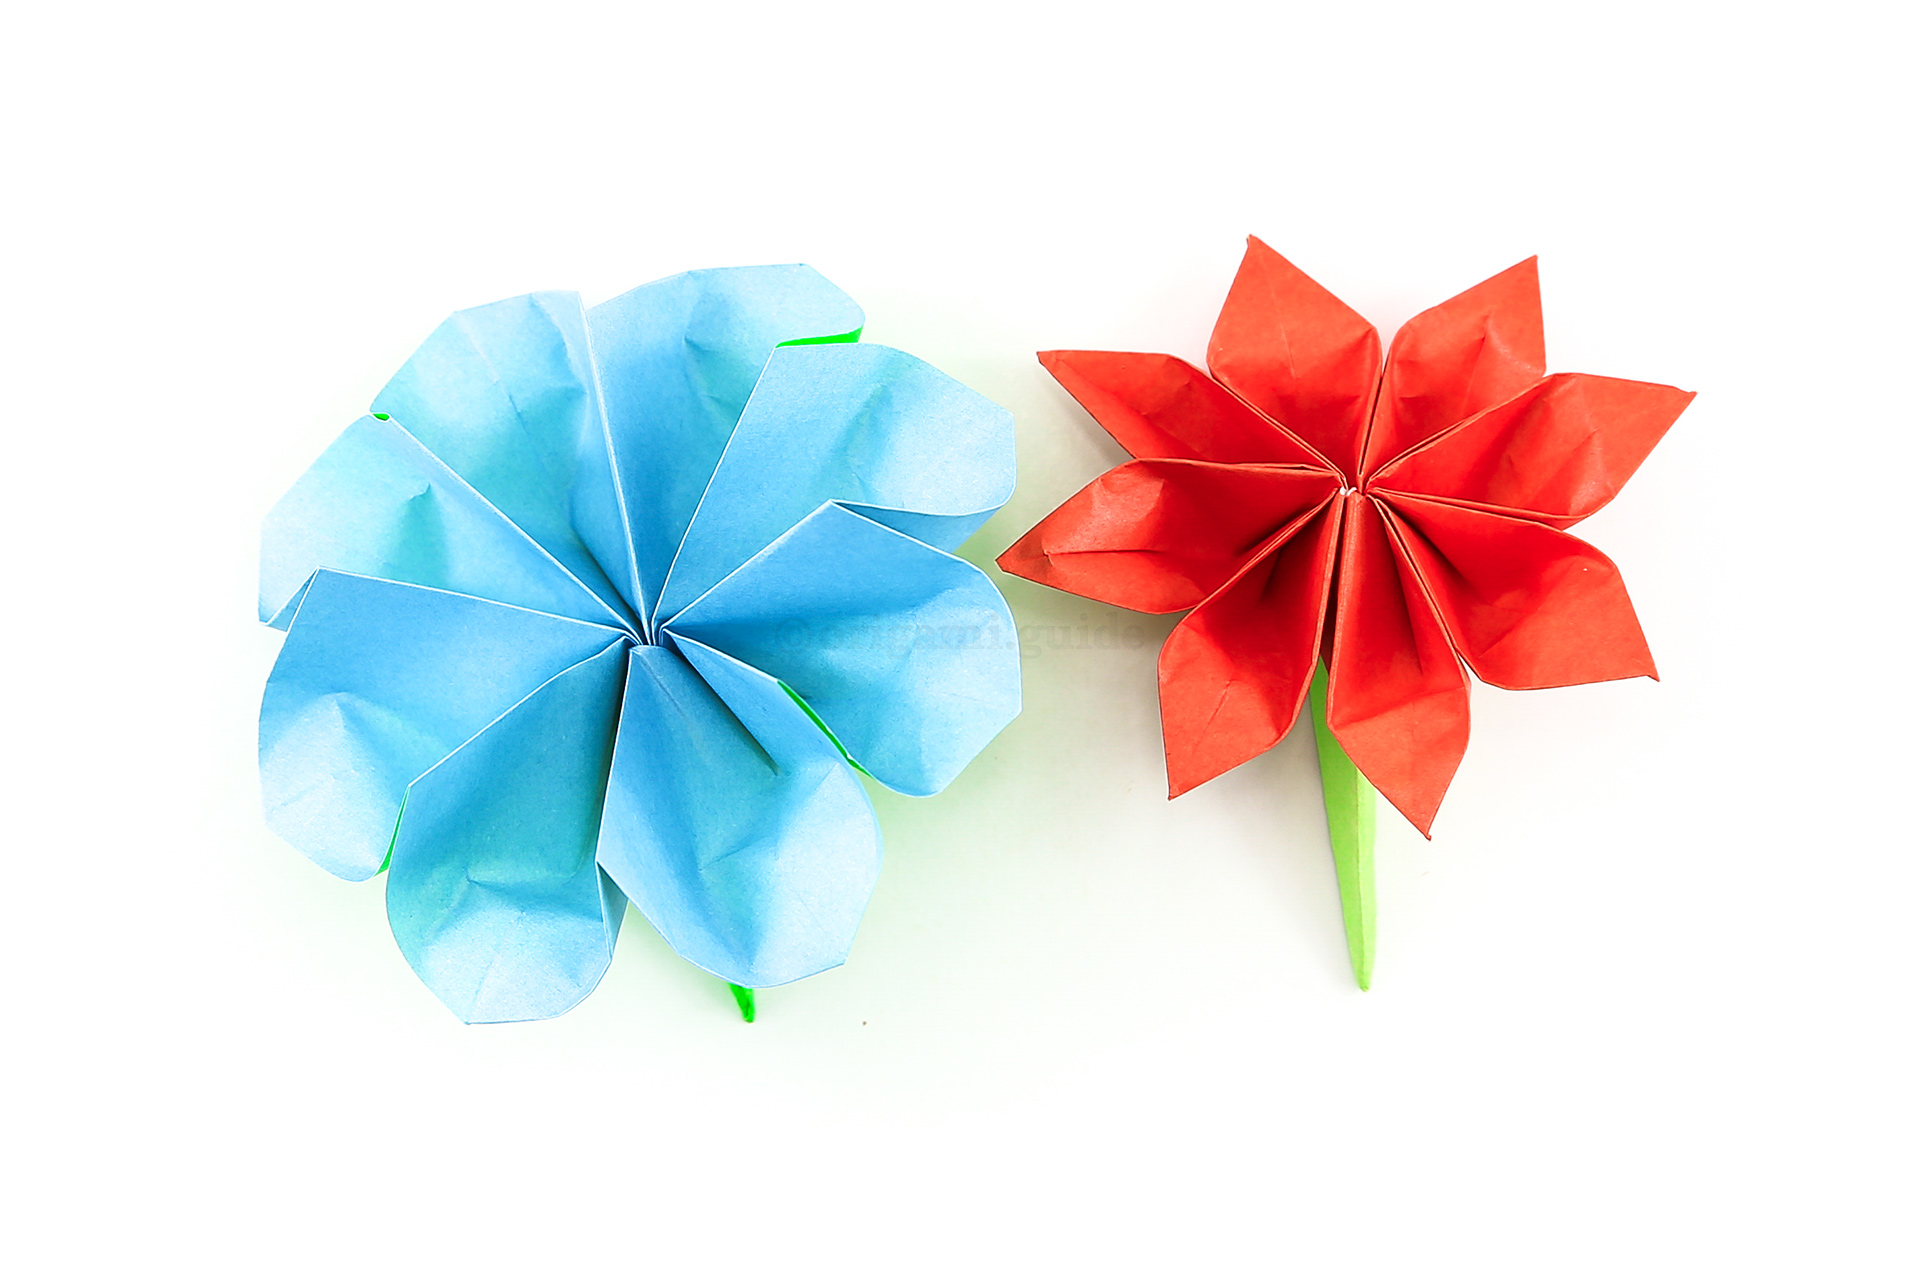 You can fold a slightly simpler version of this flower, called the Origami Blossom Flower, which has the same method minus a few steps.